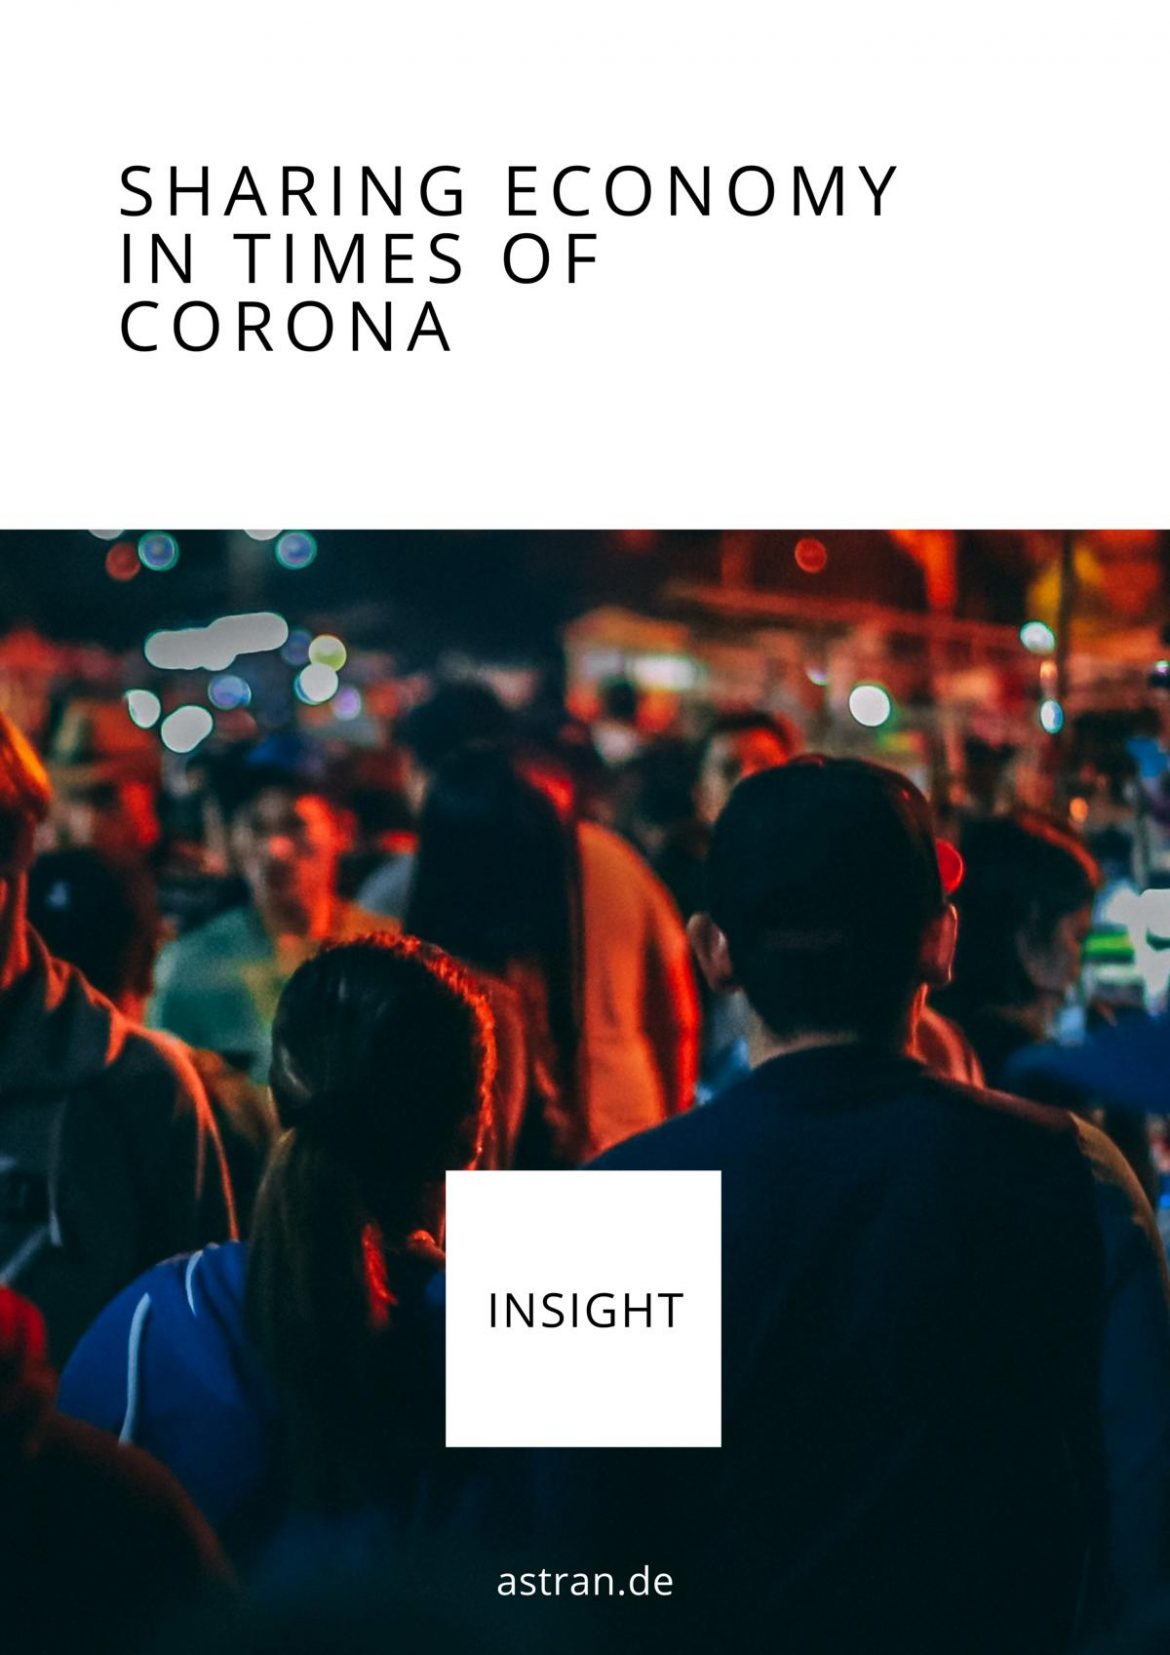 Sharing Economy in times of corona